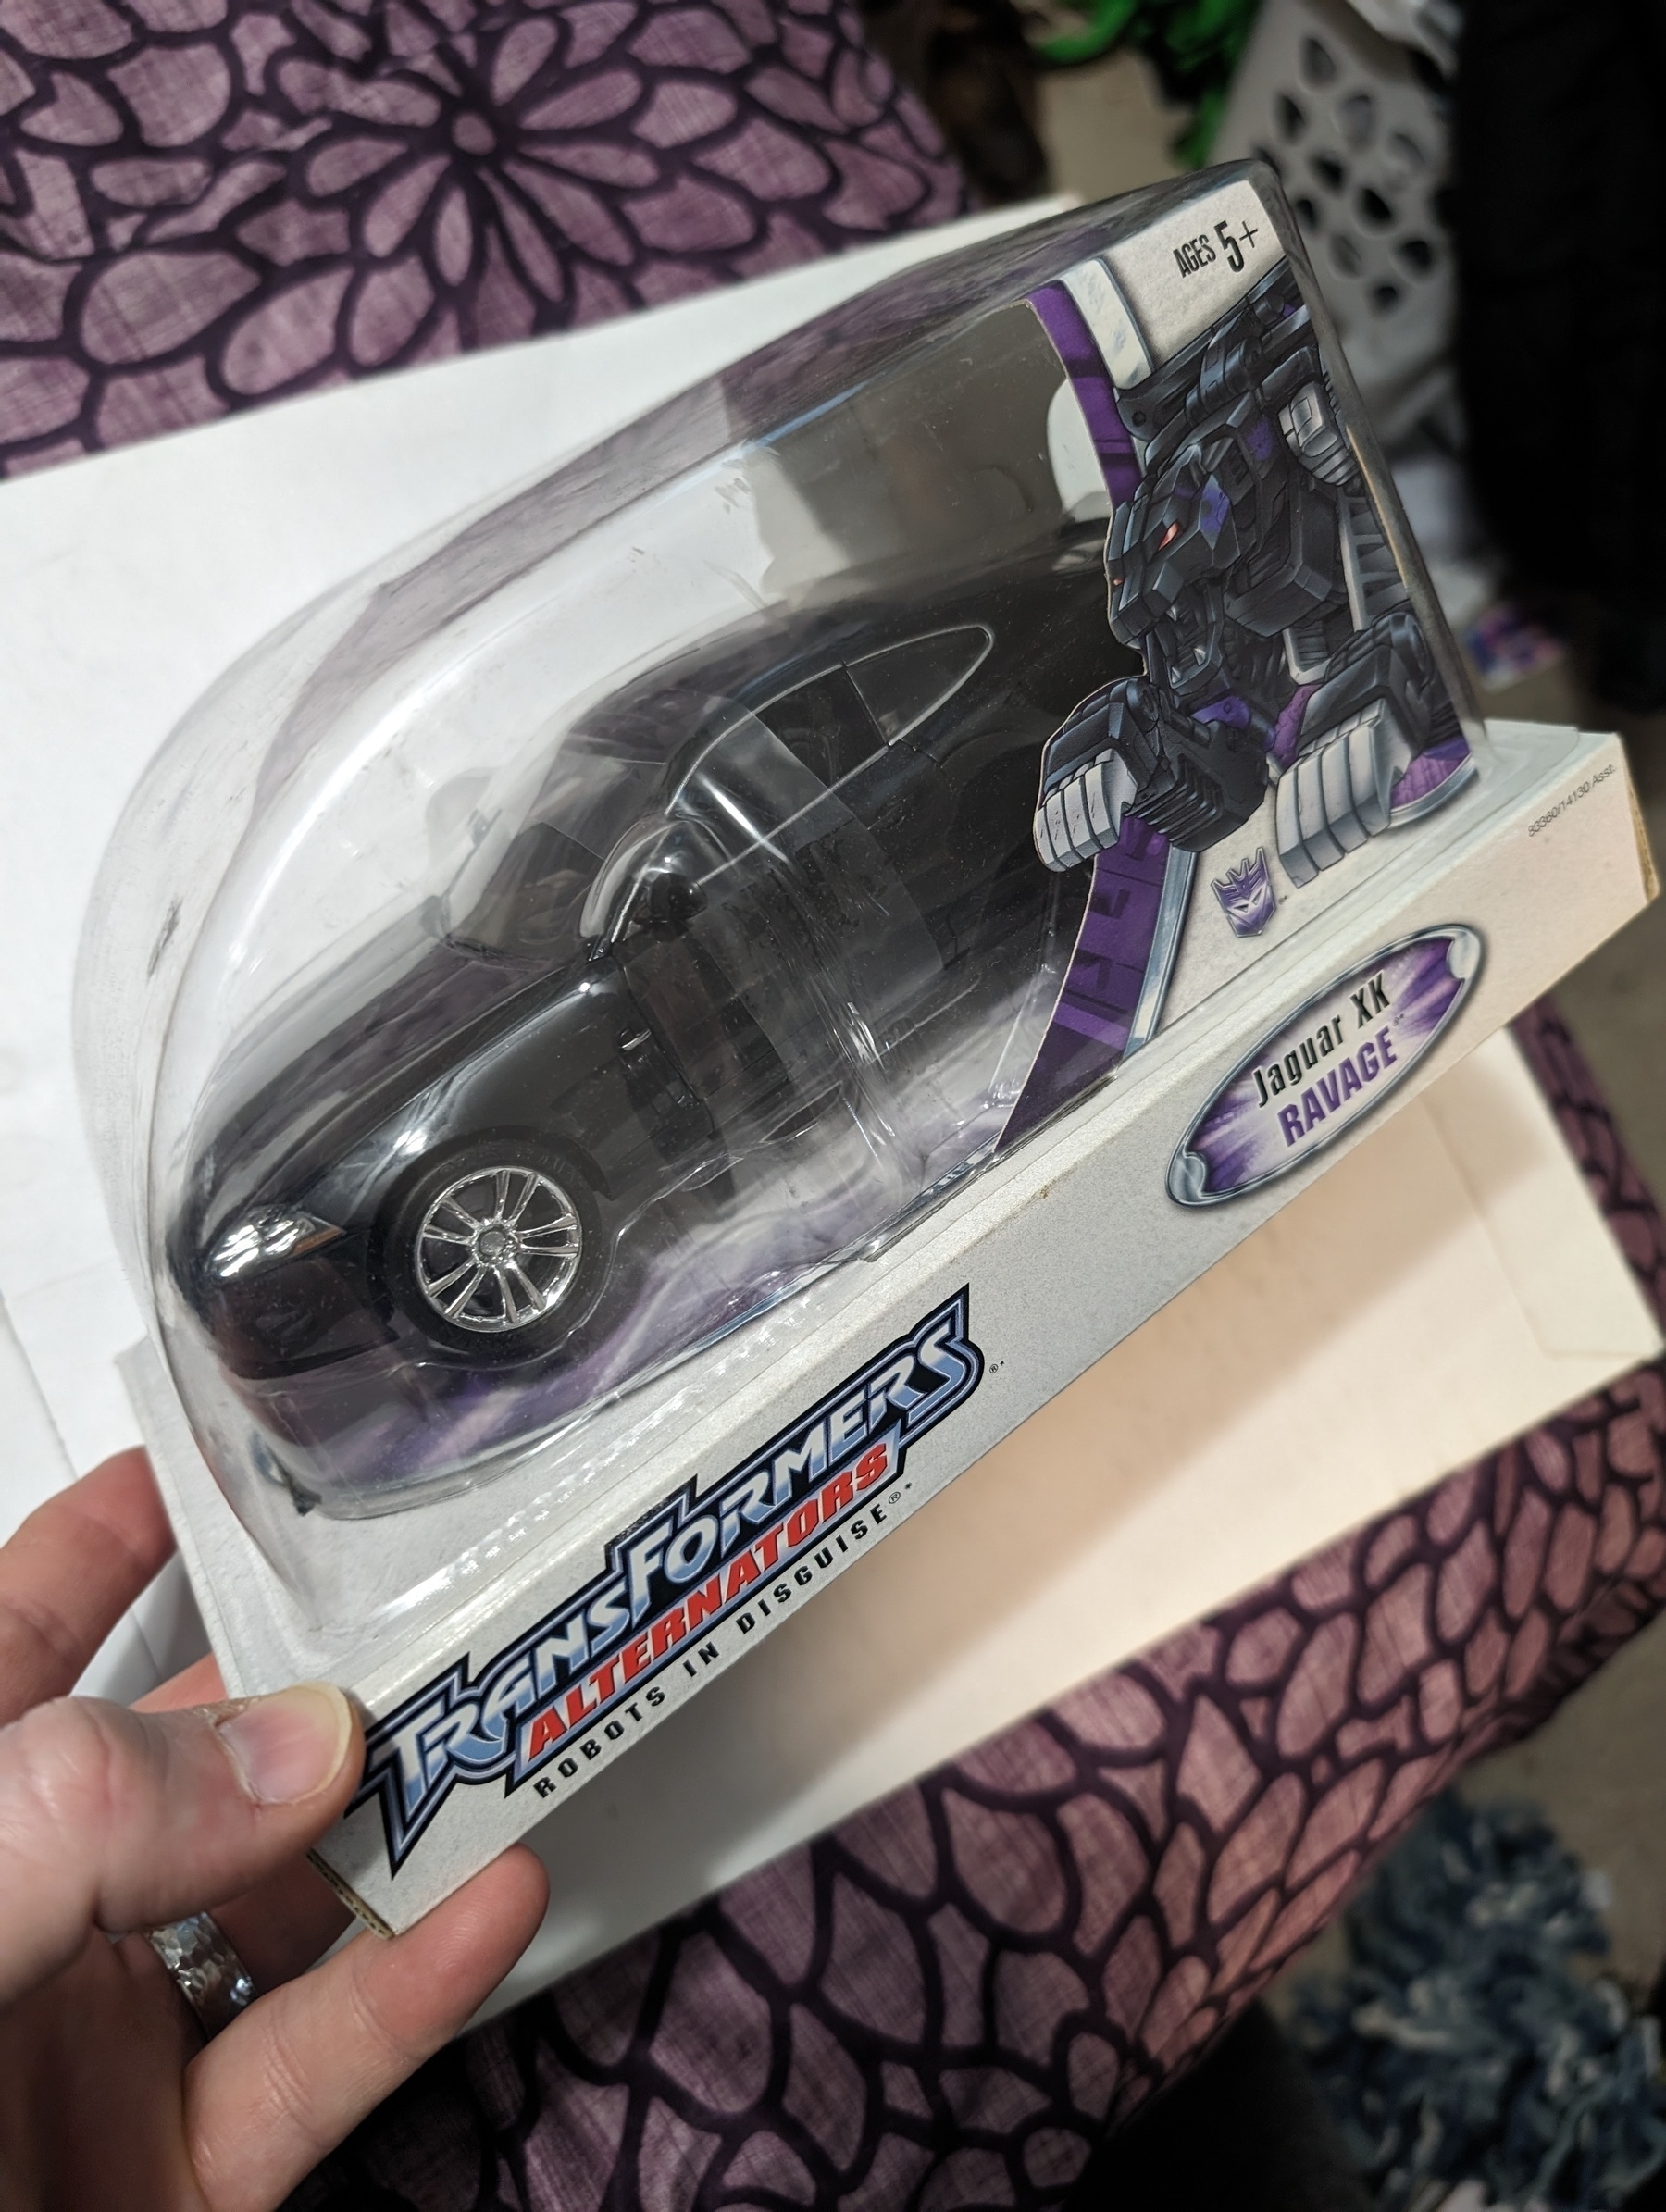 Photo of the Transformers Alternators model Ravage. A Jaguar sports luxury vehicle that changes into a killer black cat, or jaguar if you will. In an unopened box.